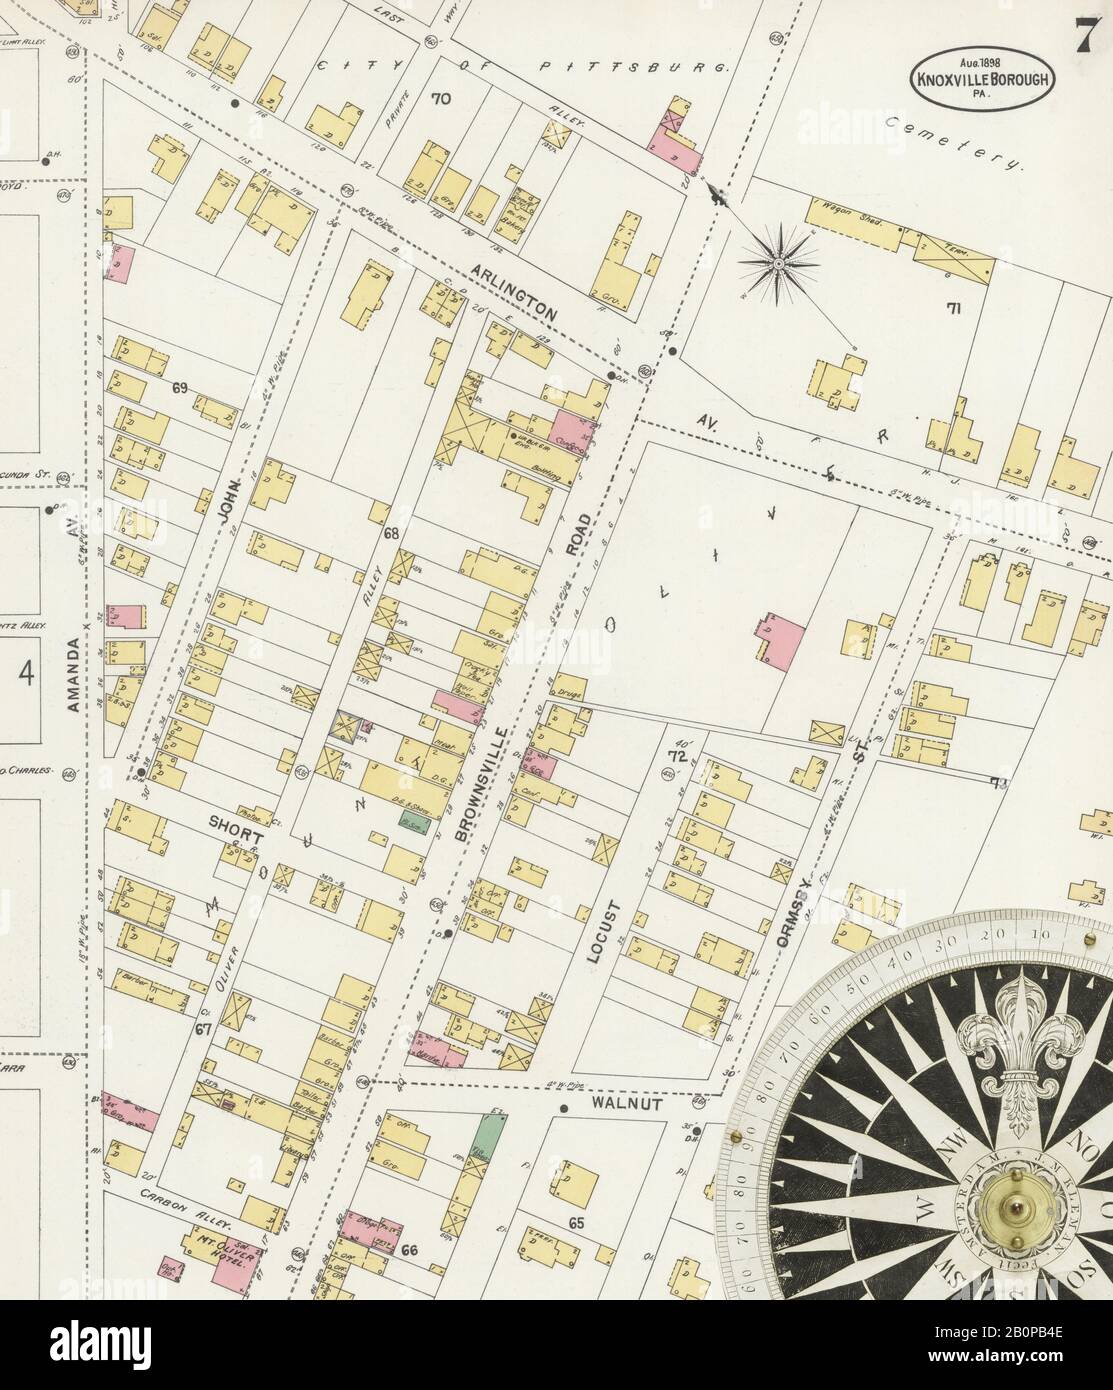 Image 7 of Sanborn Fire Insurance Map from Knoxville Borough, Allegheny County, Pennsylvania. Aug 1898. 8 Sheet(s). Acquired after 1981, America, street map with a Nineteenth Century compass Stock Photo